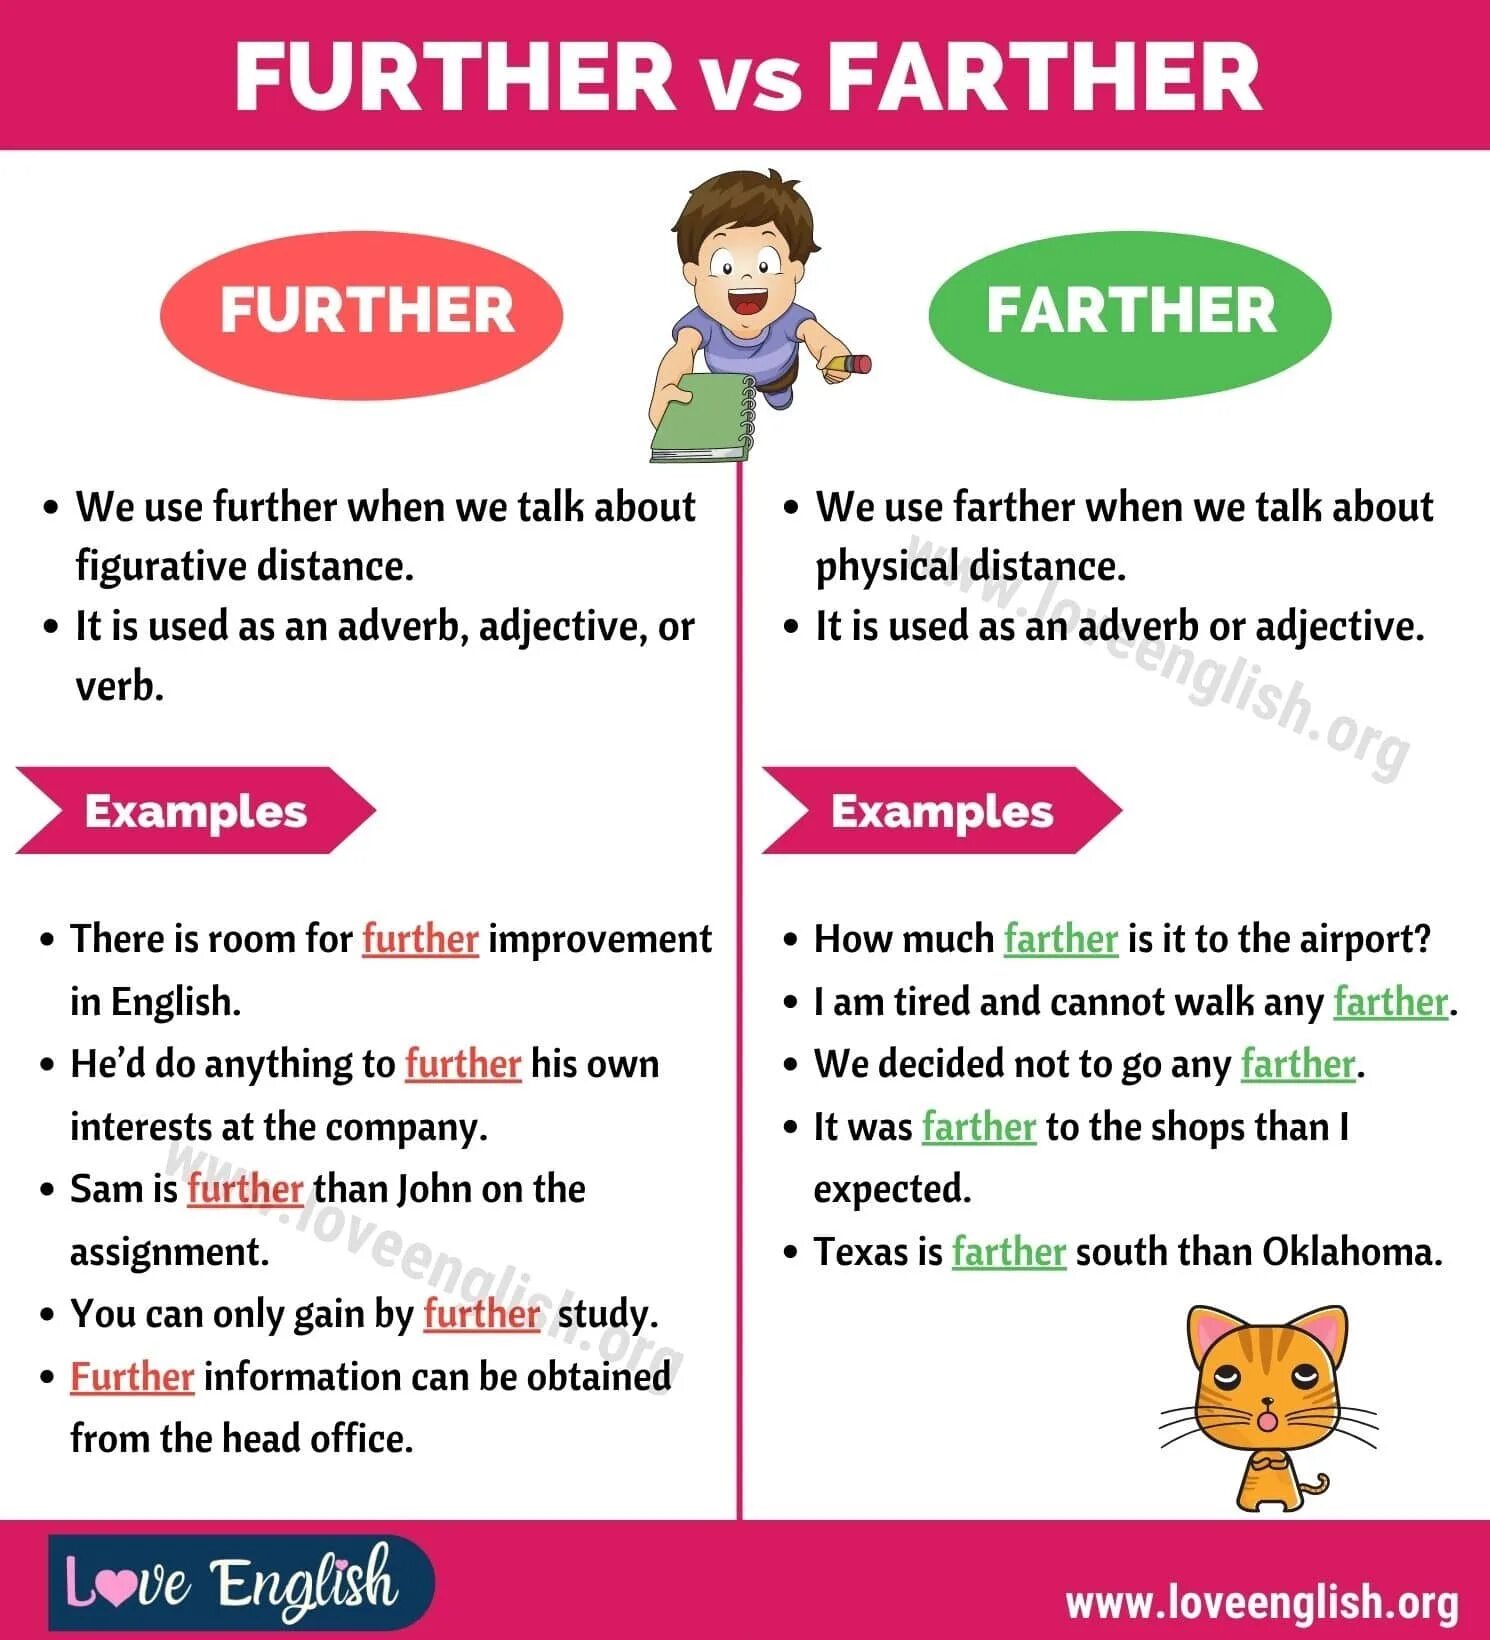 Farther further. Примеры с farther и further. Far farther further. Farther further разница. Further vs farther